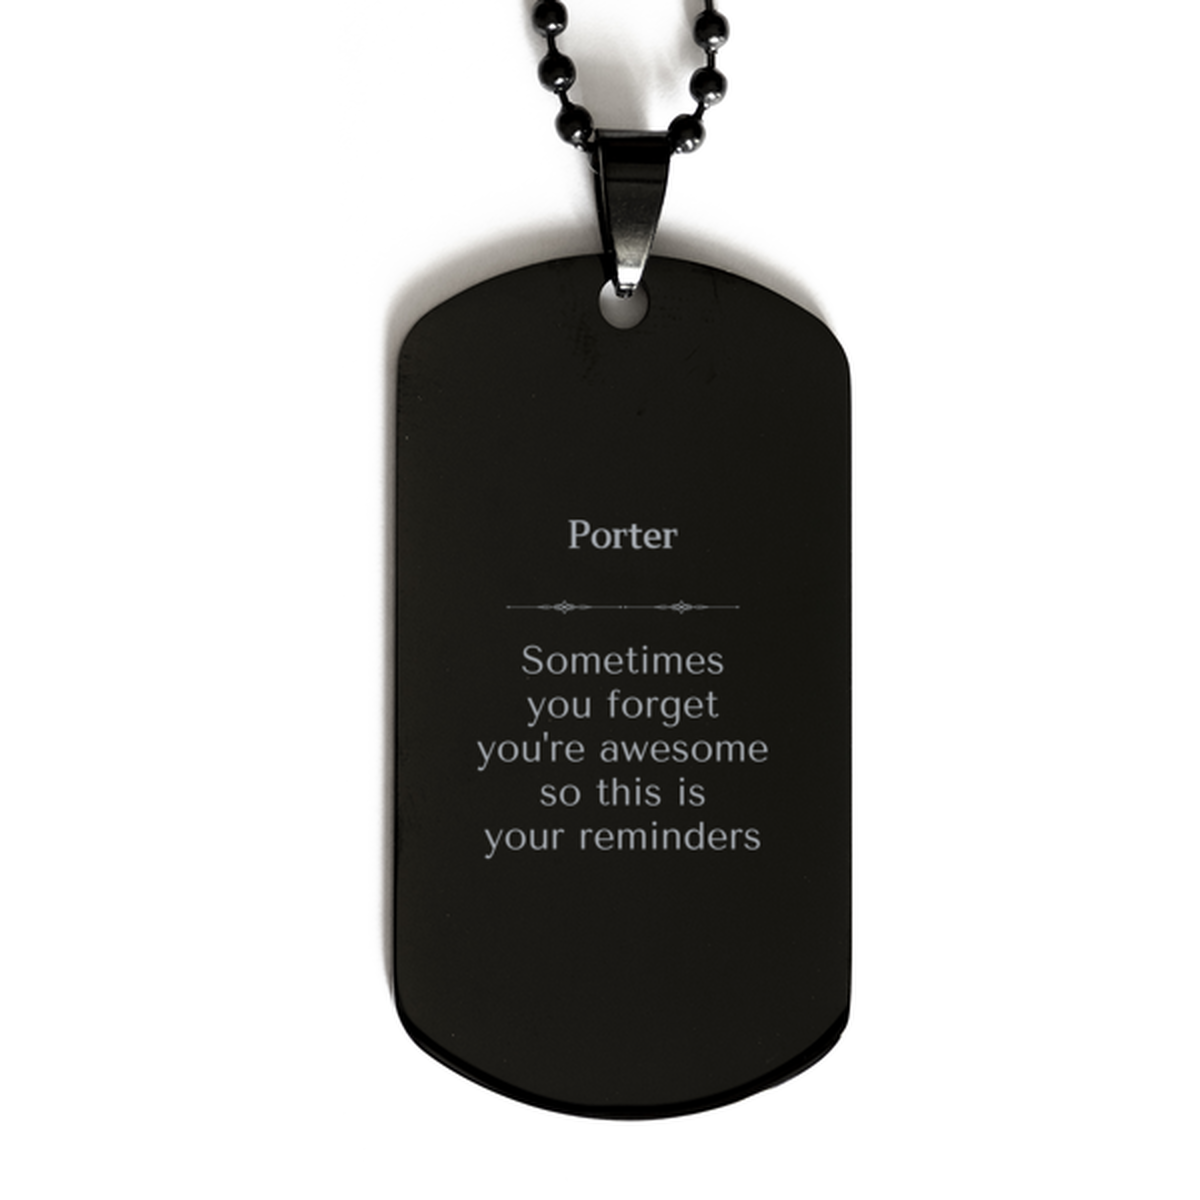 Sentimental Porter Black Dog Tag, Porter Sometimes you forget you're awesome so this is your reminders, Graduation Christmas Birthday Gifts for Porter, Men, Women, Coworkers